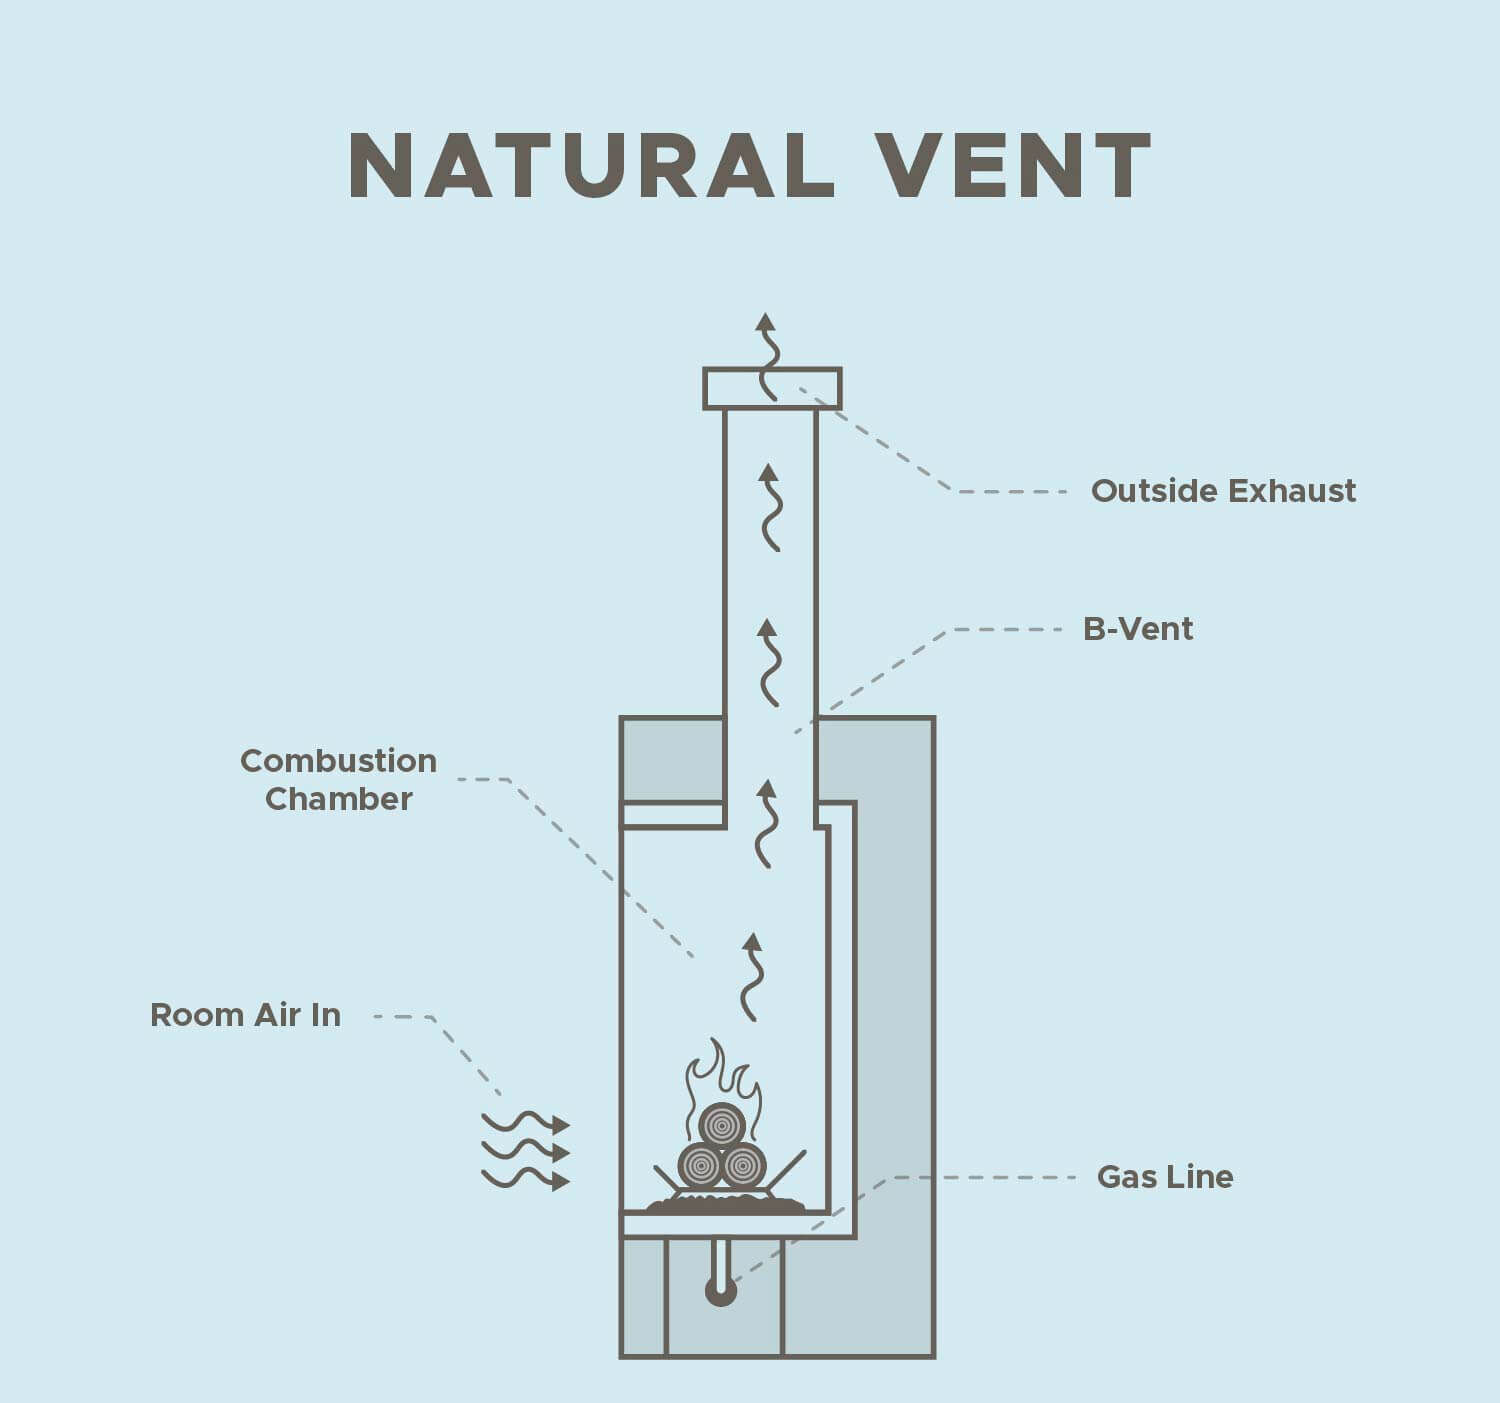 B-Vent, or Natural Vent, fireplaces use a single, double-walled pipe to expel exhaust out through the roof.